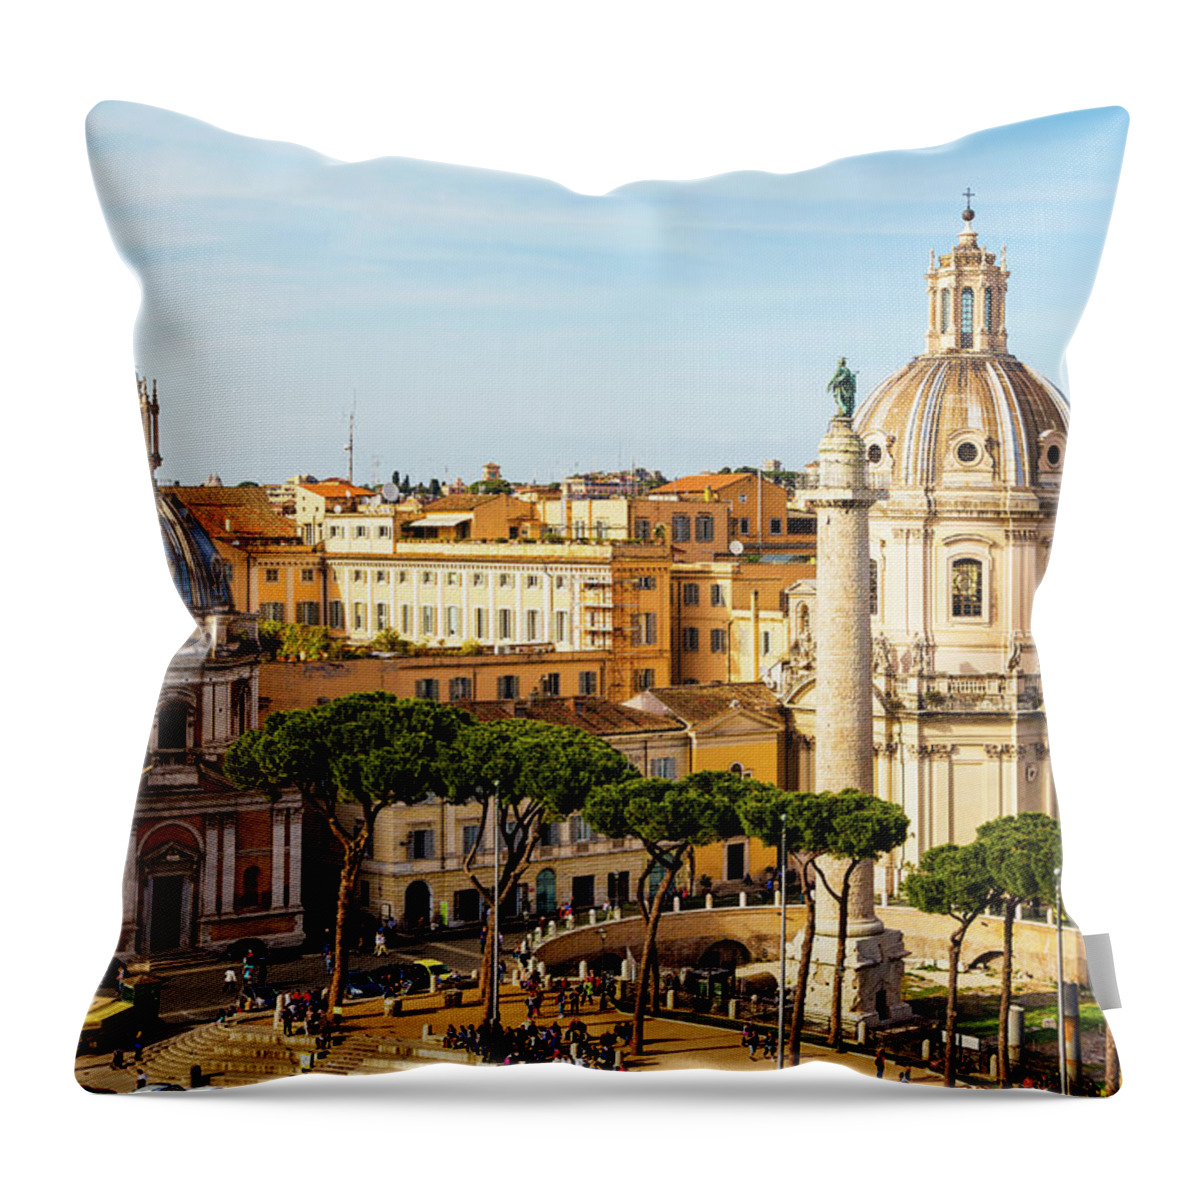 Photography Throw Pillow featuring the photograph Rome, Italy. Rome, Italy. Piazza Della by Panoramic Images